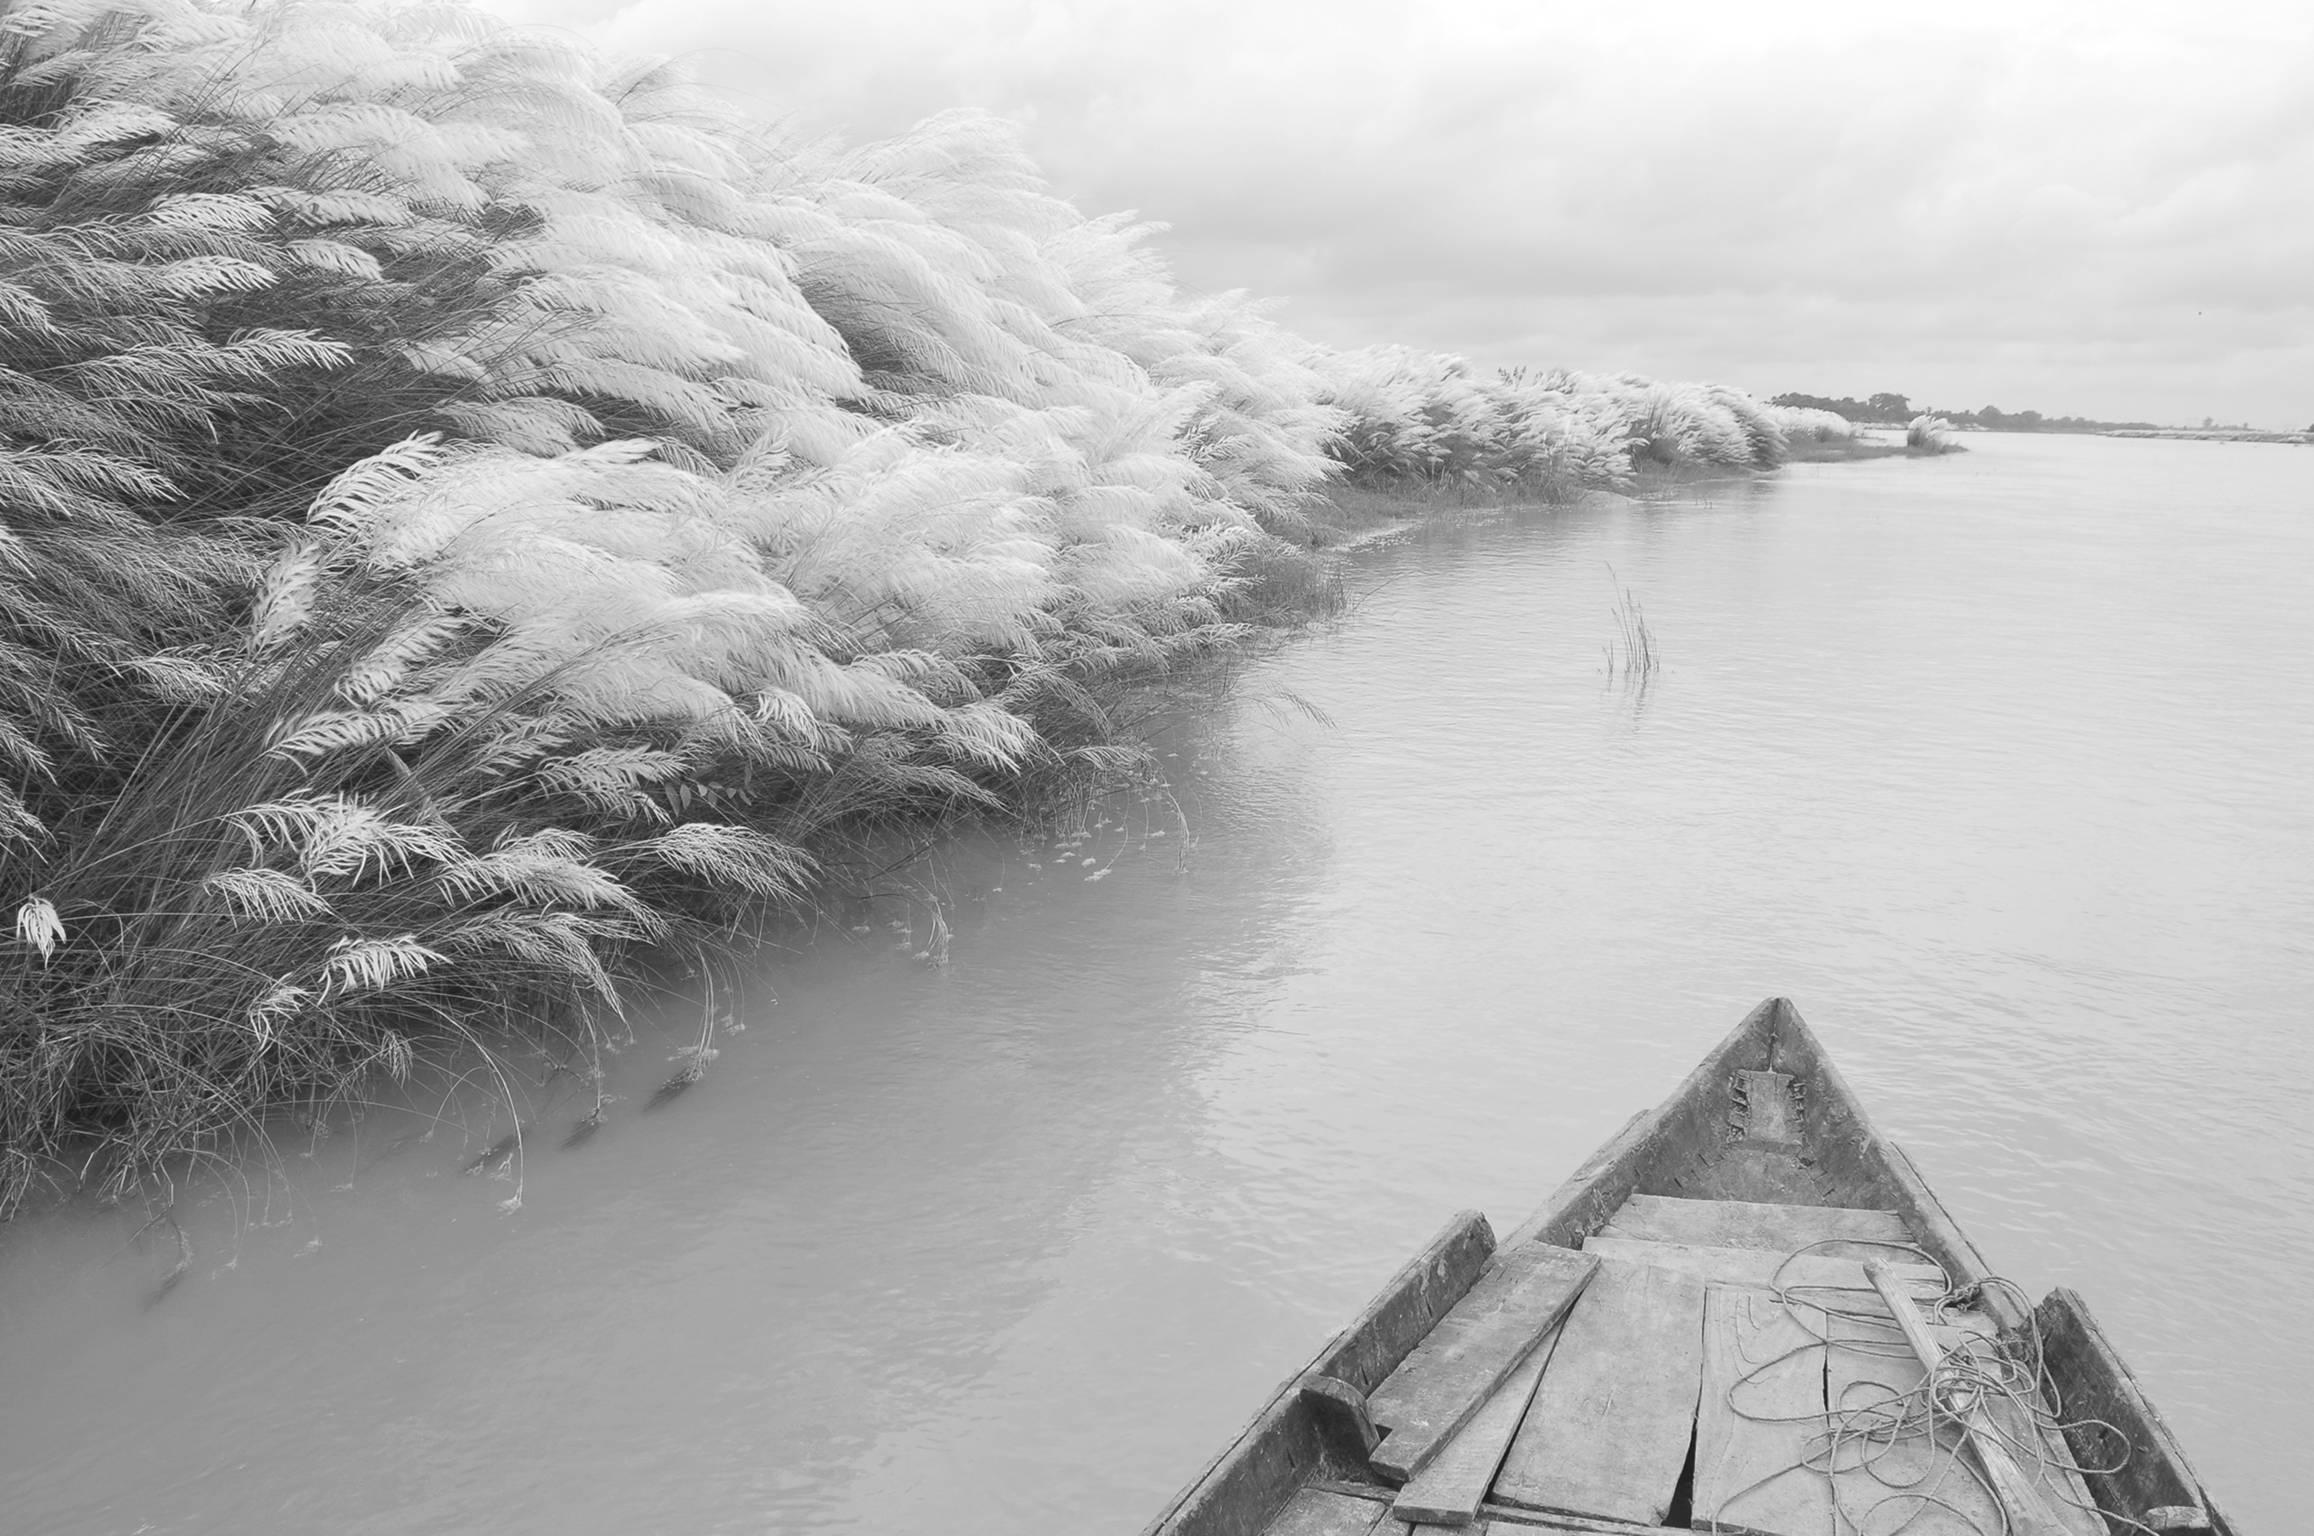 Mohan L. Mazumder Black and White Photograph - River Side Photography, Kans Grass, Boat, Black, White by Indian Artist"In Stock"